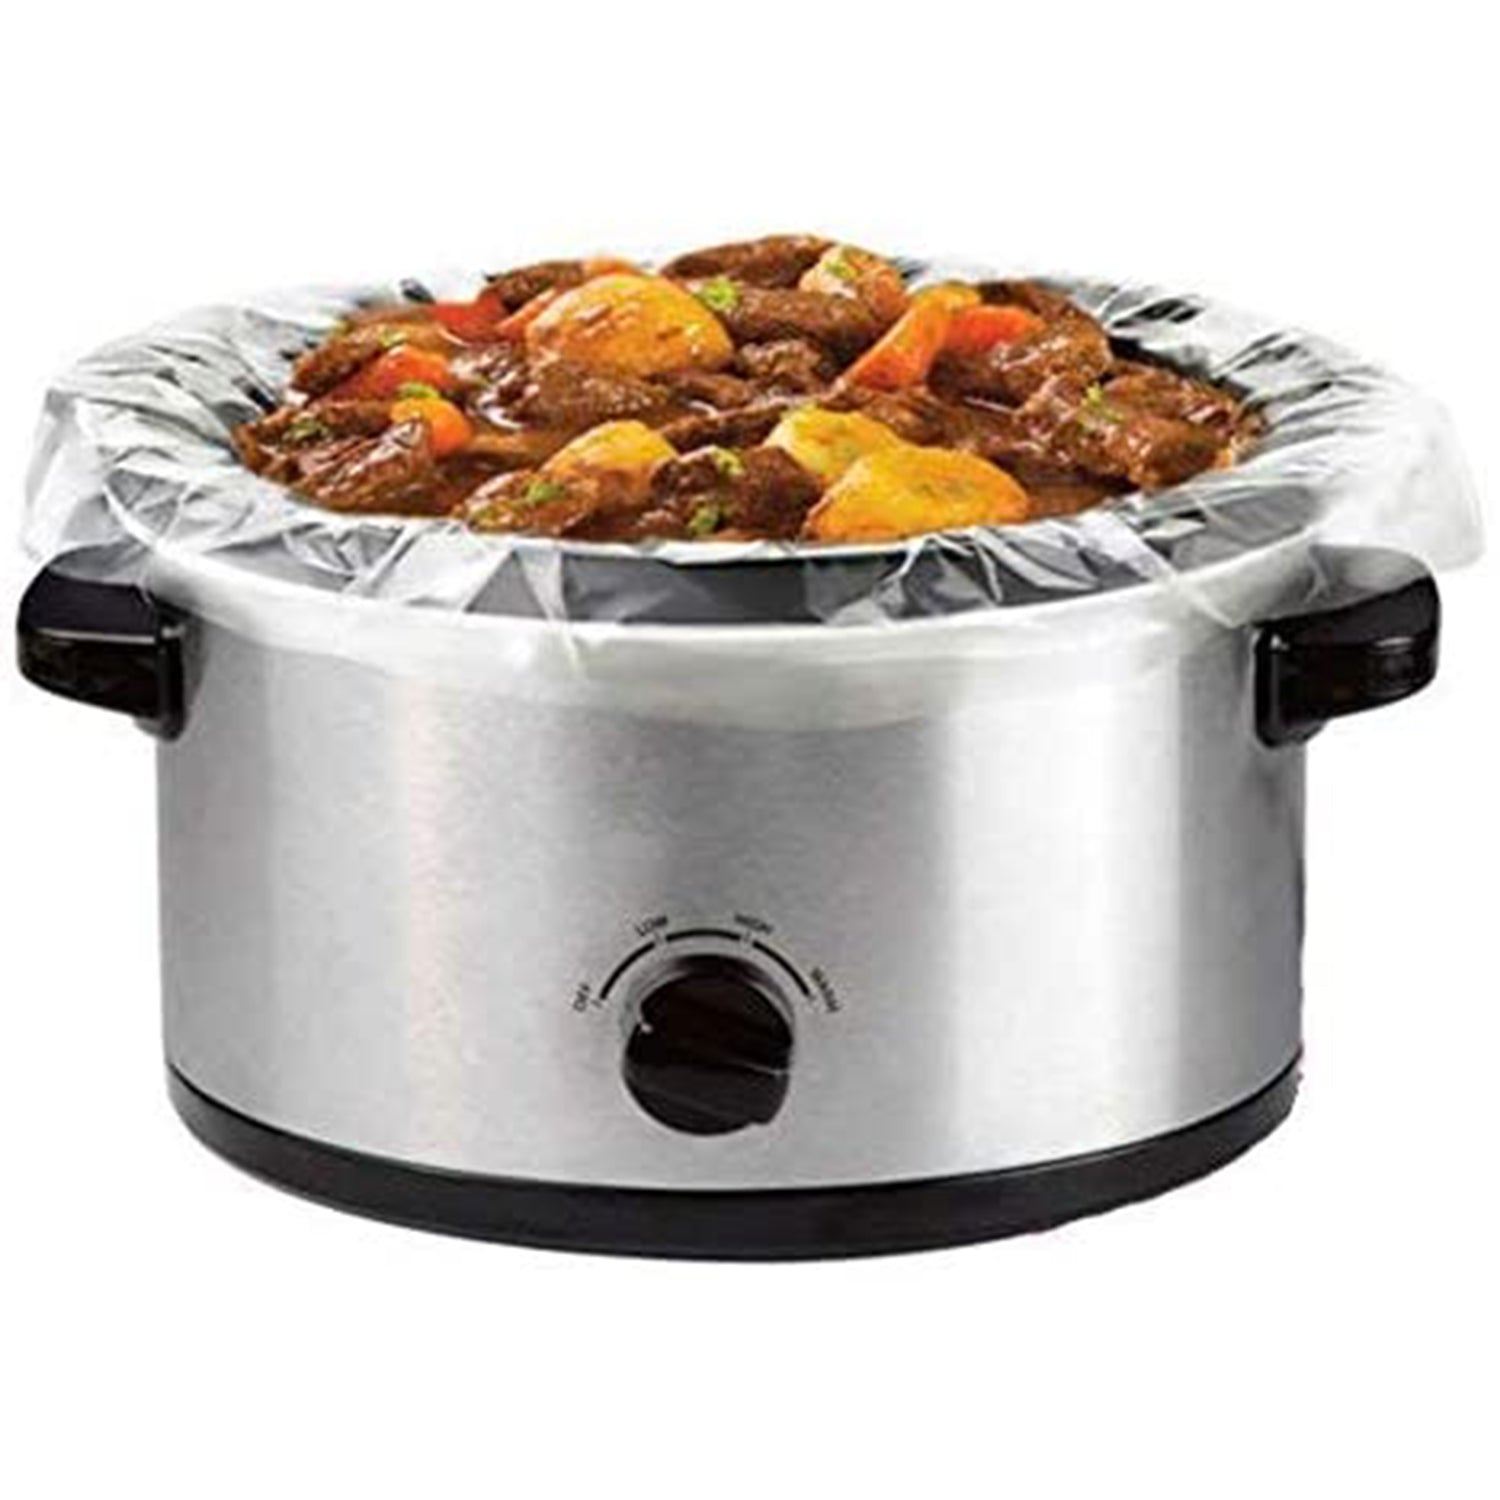 Are Slow Cooker Liners Really Worth It?